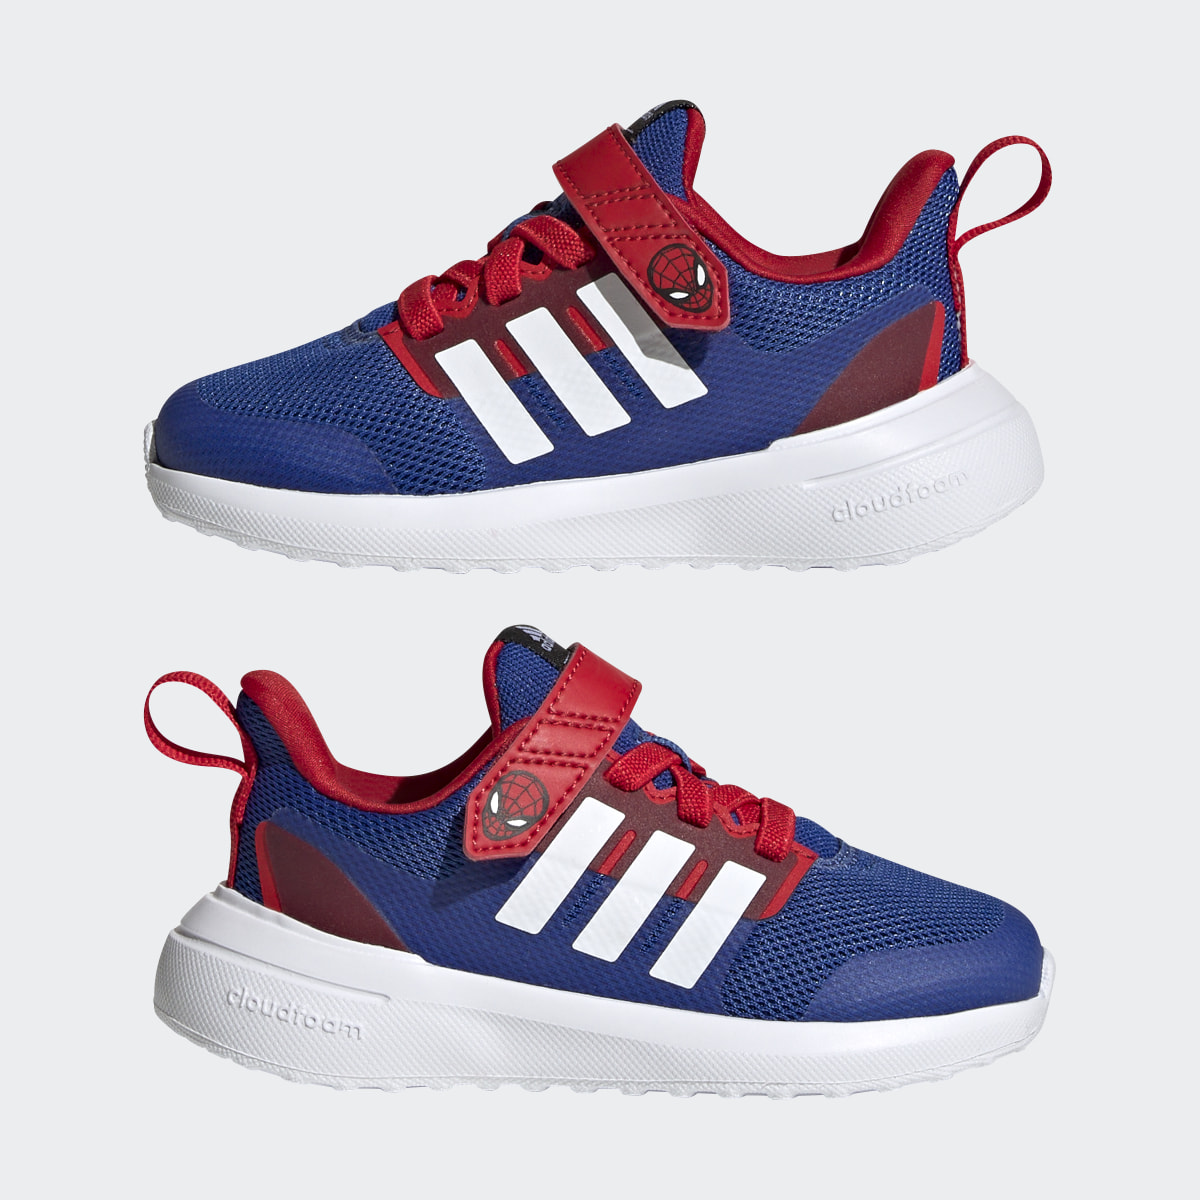 Adidas x Marvel FortaRun 2.0 Spider-Man Cloudfoam Sport Running Elastic Lace Top Strap Shoes. 8